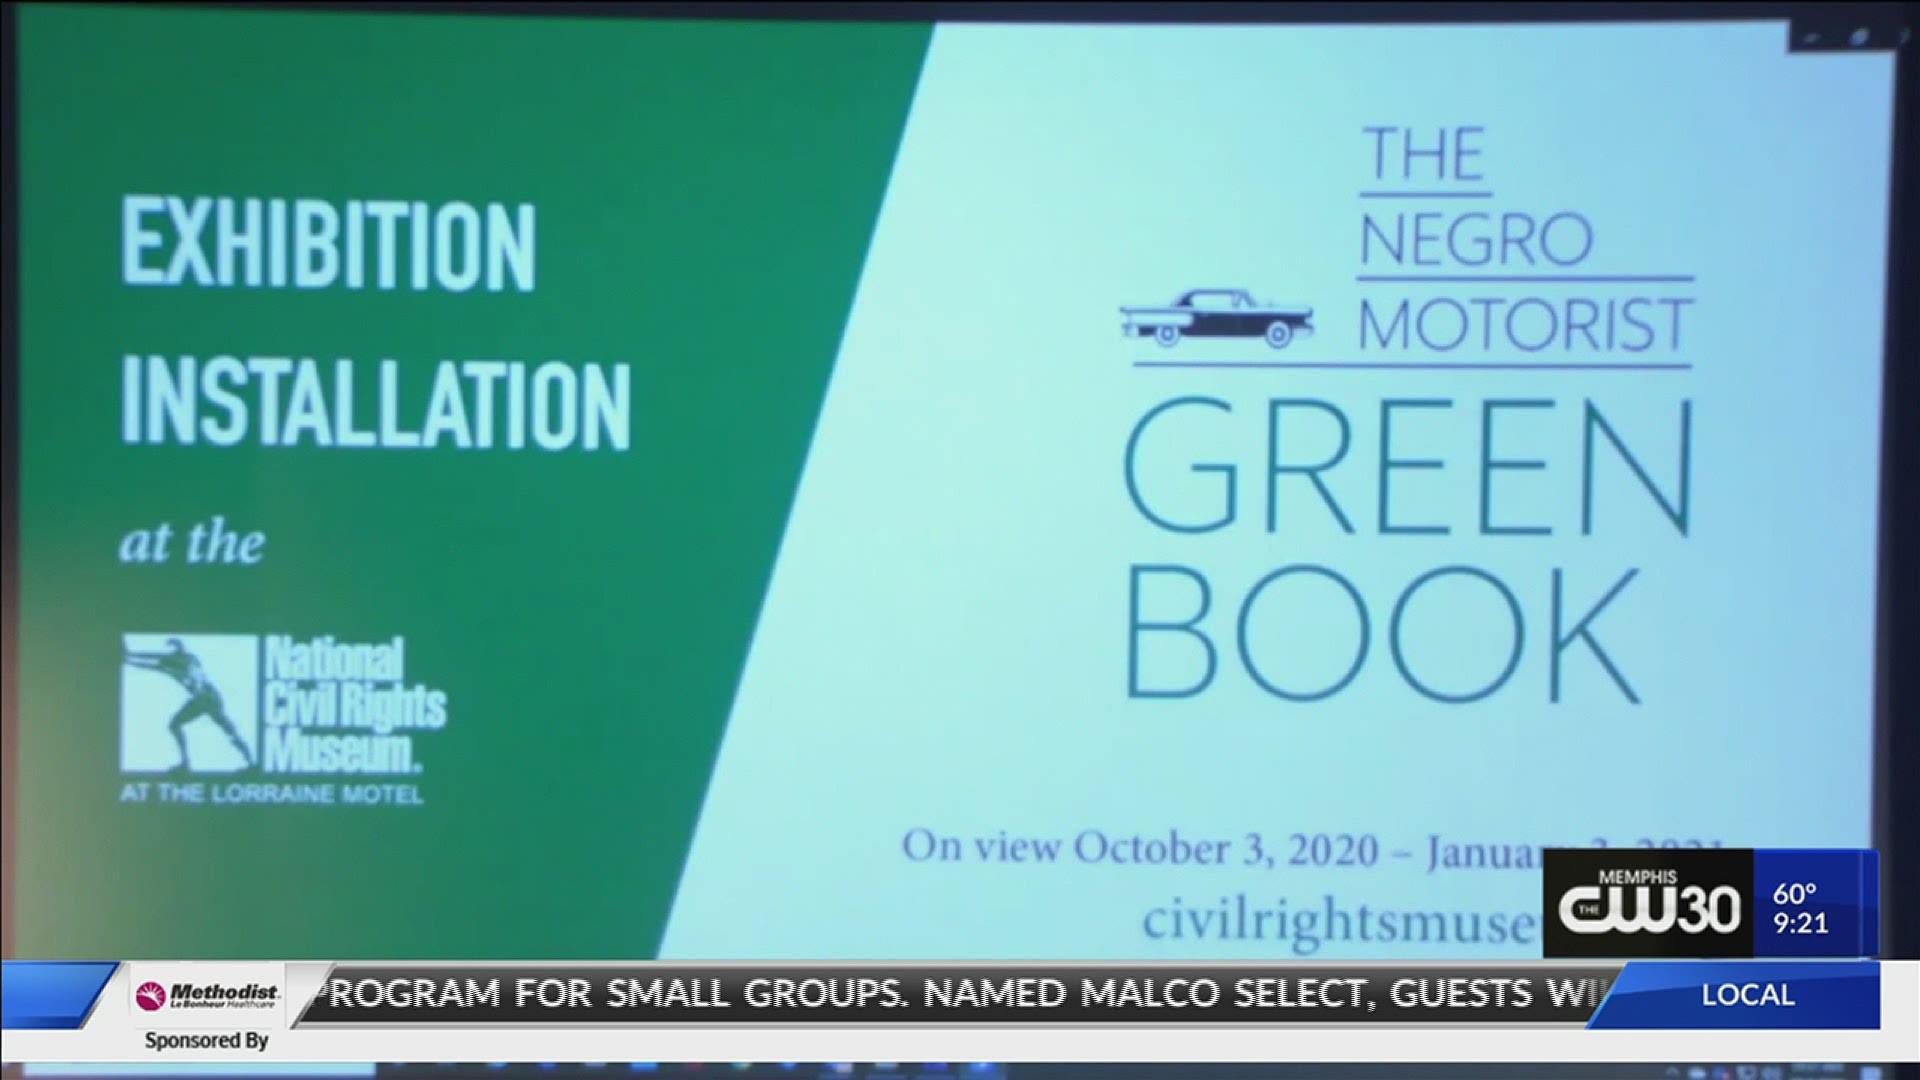 The Green Book was an annual guide created in 1936 that helped Black Americans travel U.S. with dignity by listing facilities that welcomed them during segregation